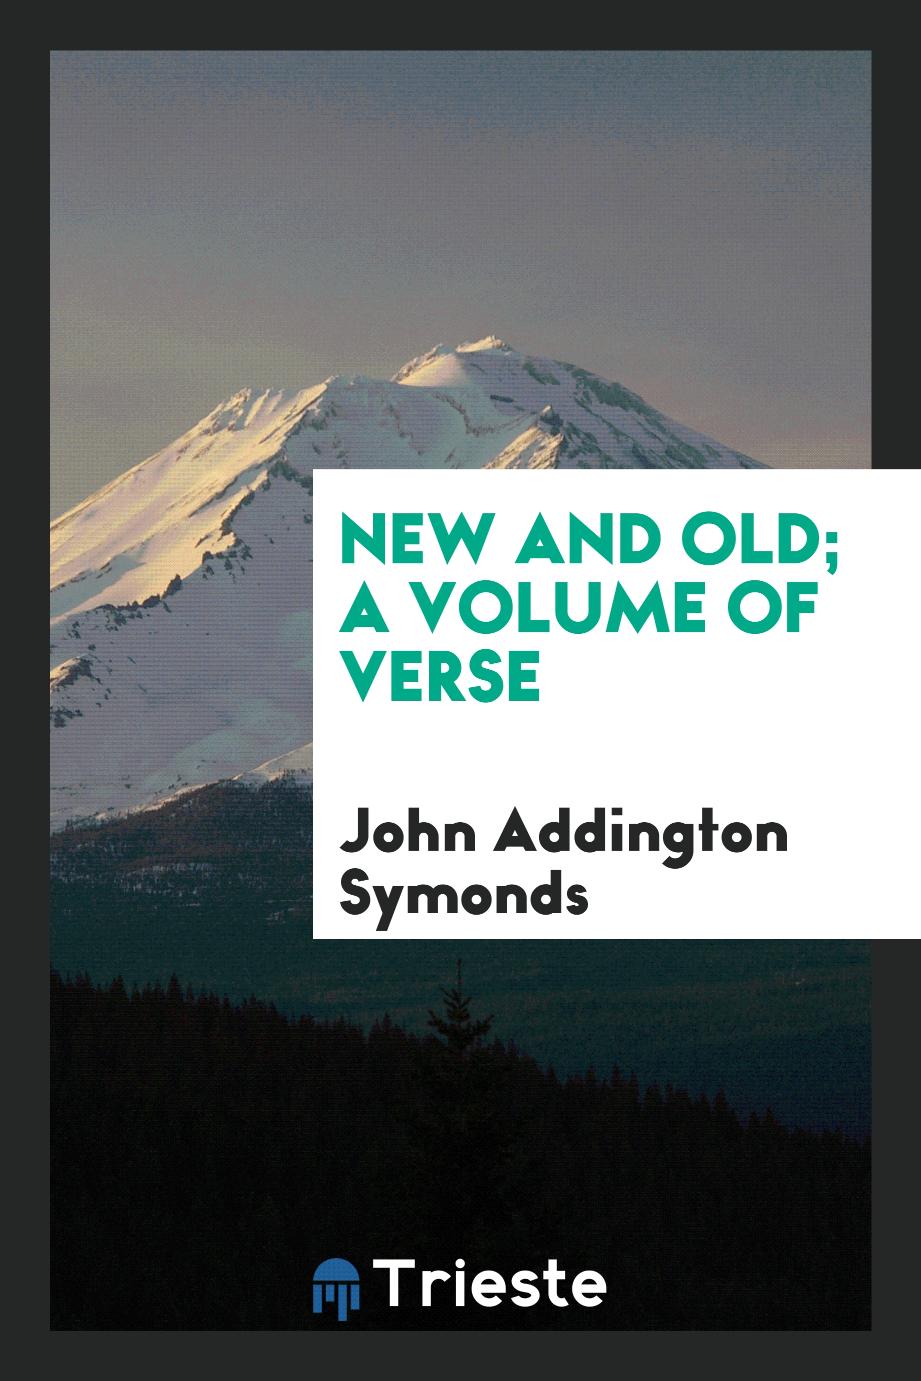 New and old; a volume of verse